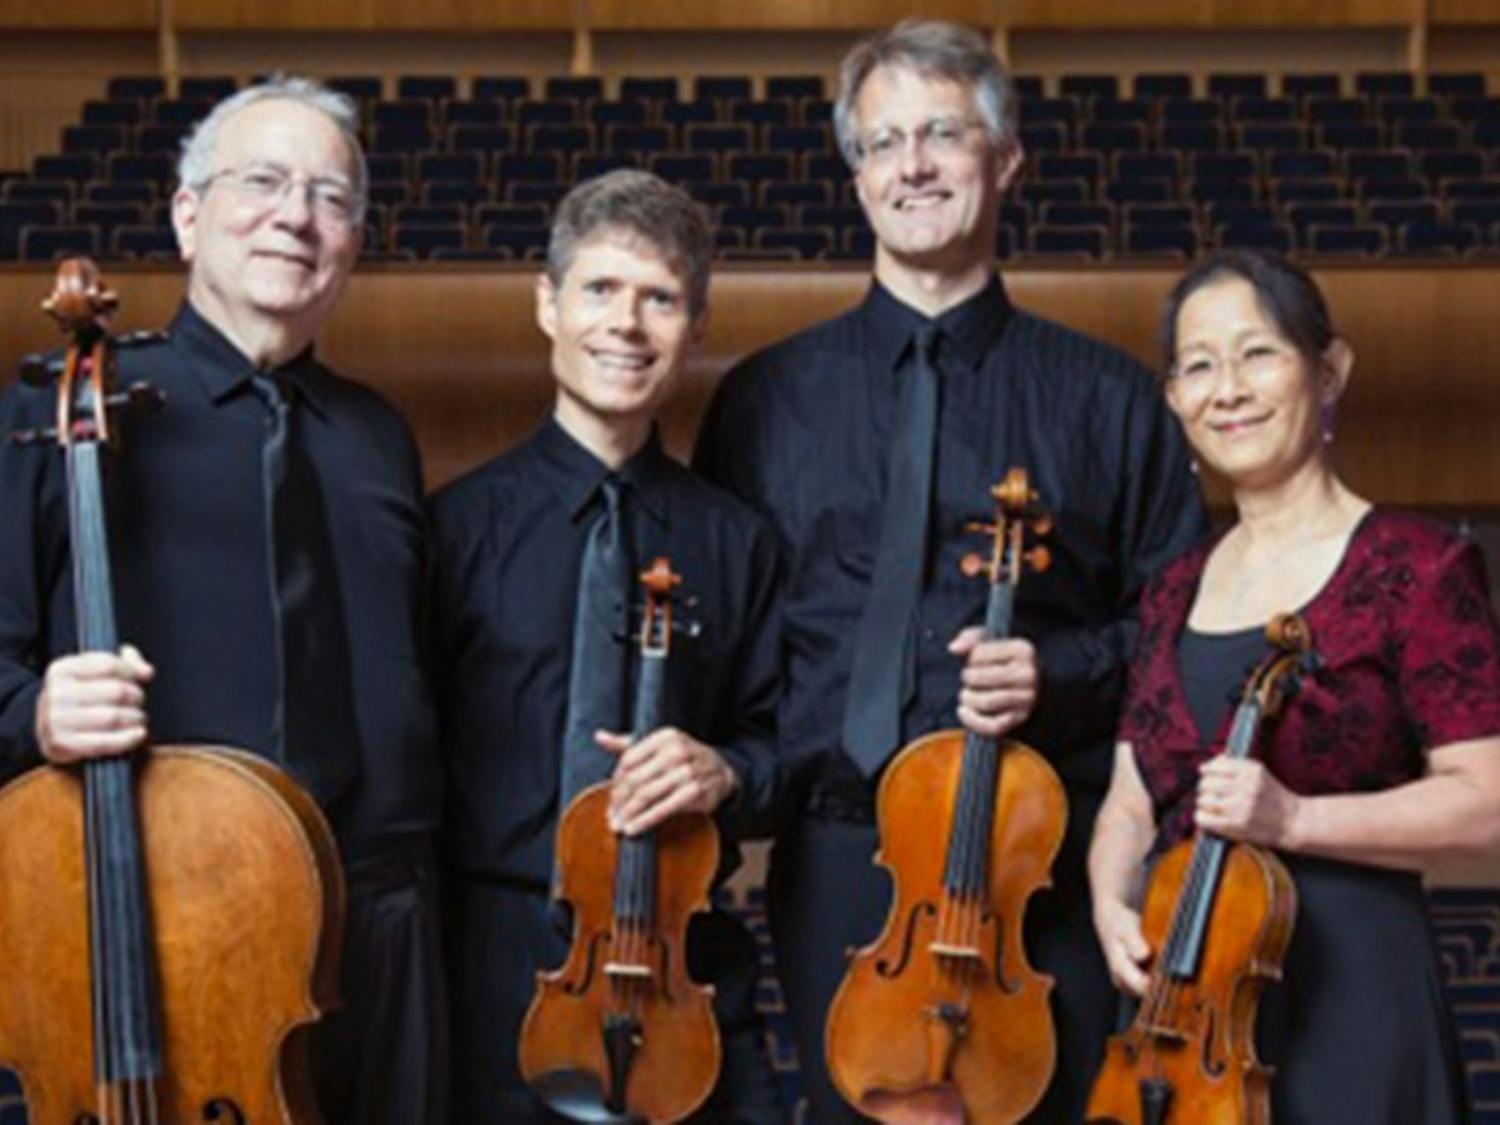 The Ciompi Quartet­—comprised of Eric Pritchard, Hsiao-mei Ku, Jonathan Bagg and Fred Raimi—smiles with their instruments, two violins, a viola and cello.